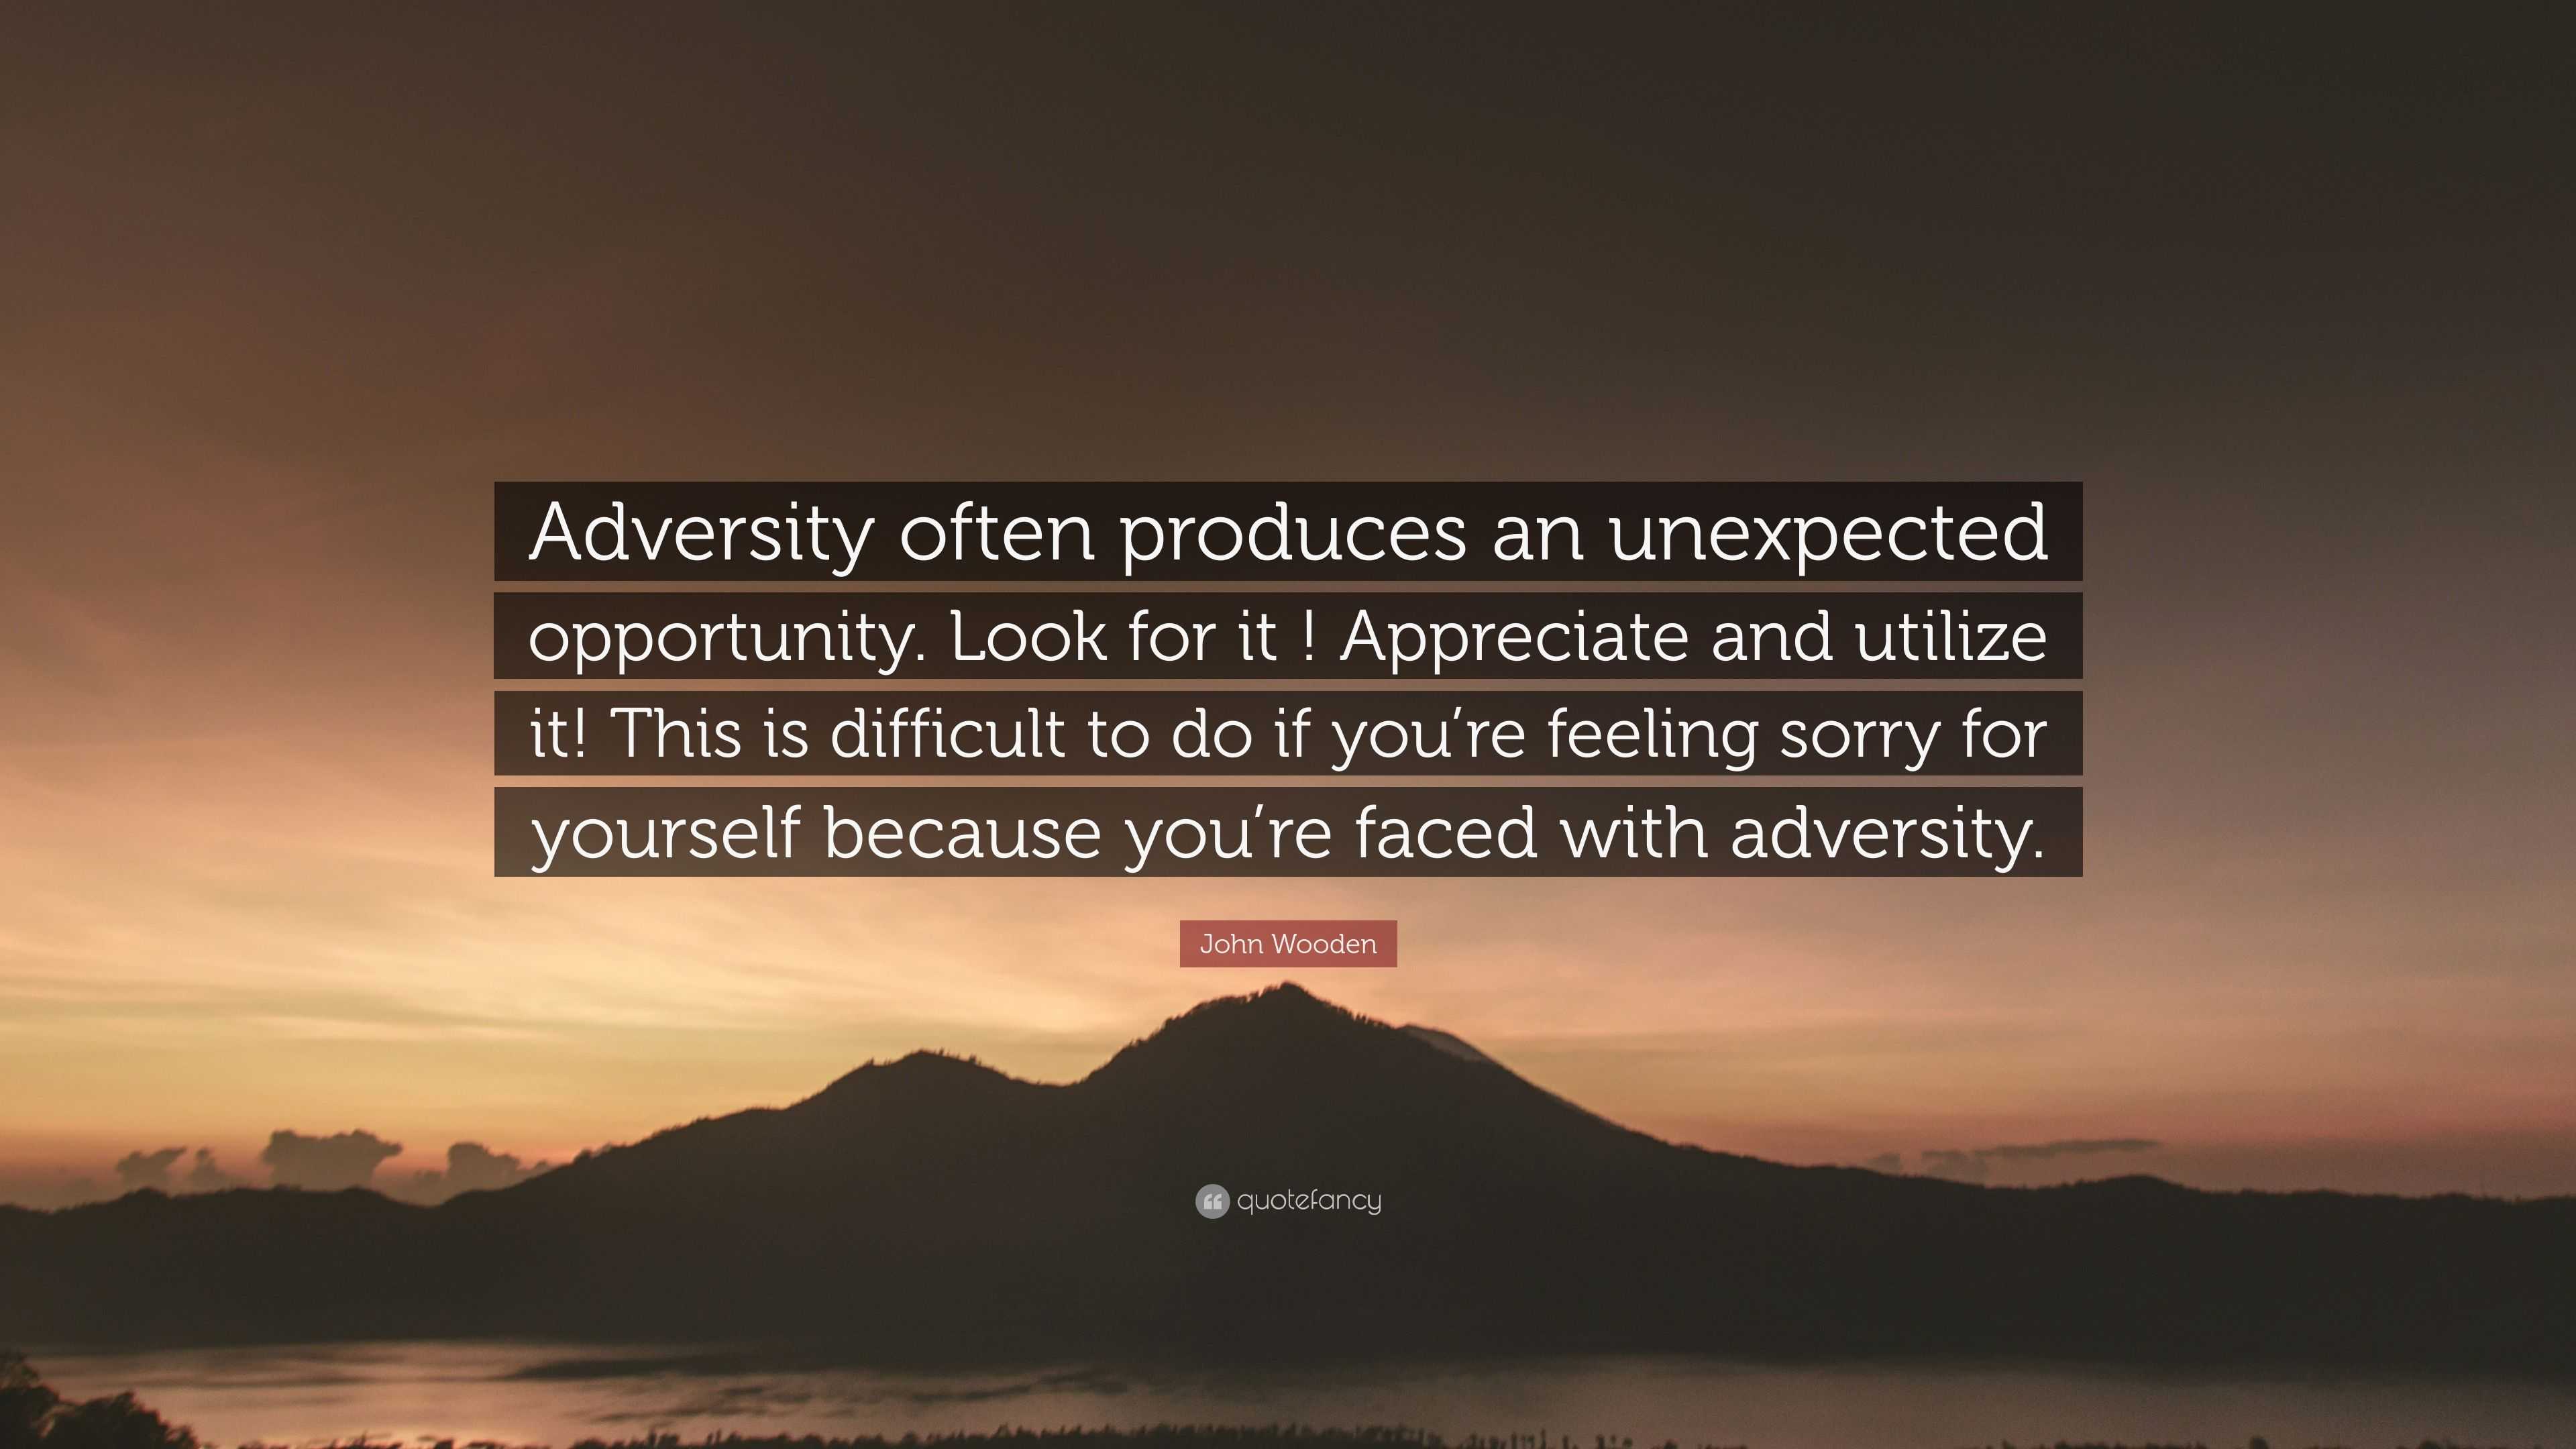 John Wooden Quote “Adversity often produces an unexpected